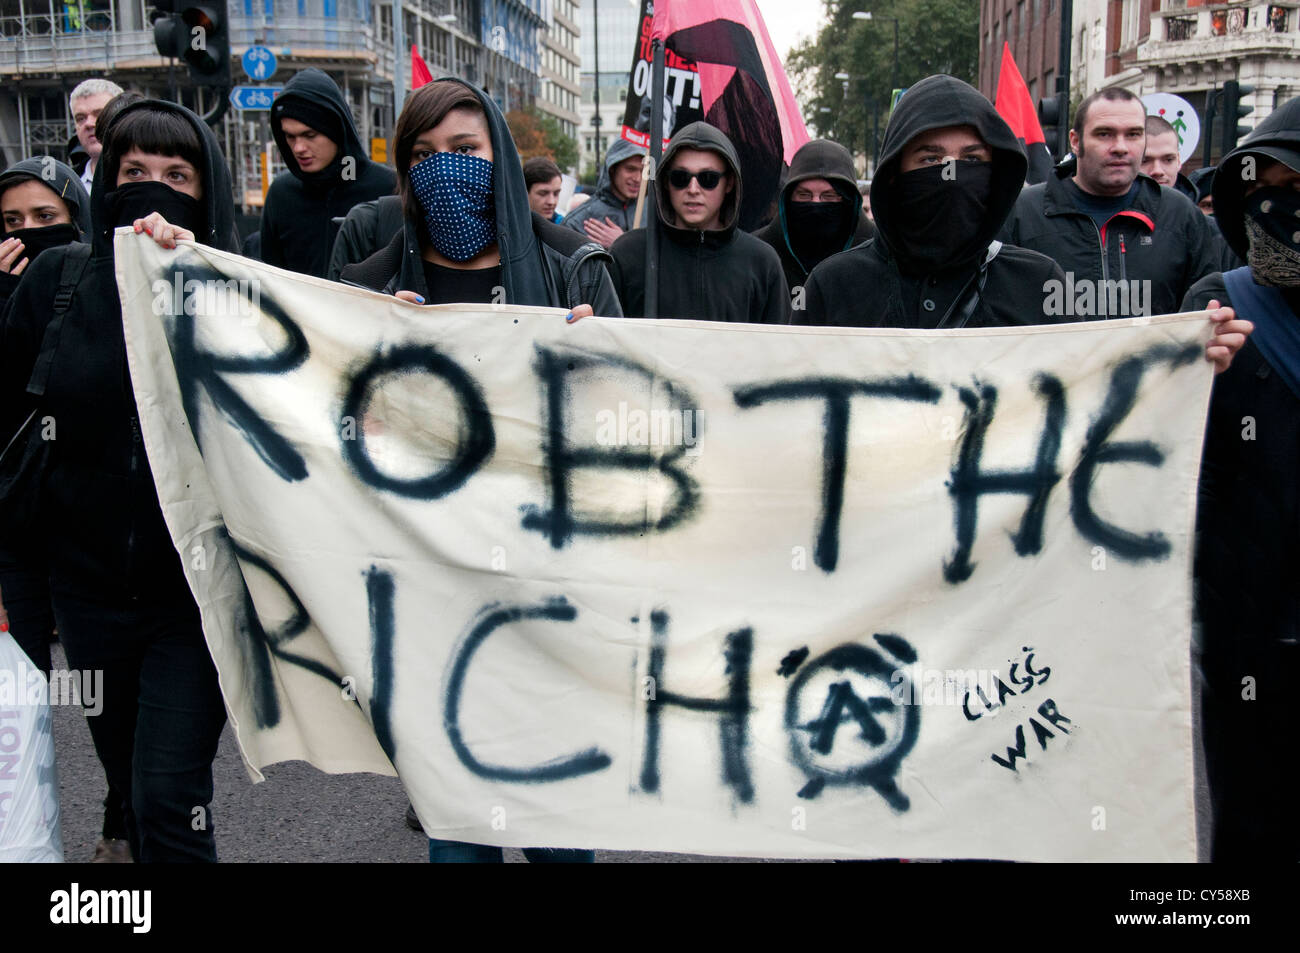 Anarchist Black Bloc  disrupt Anti-austerity and anti cuts  protest organized by the TUC  marched through Central London Oct 201 Stock Photo